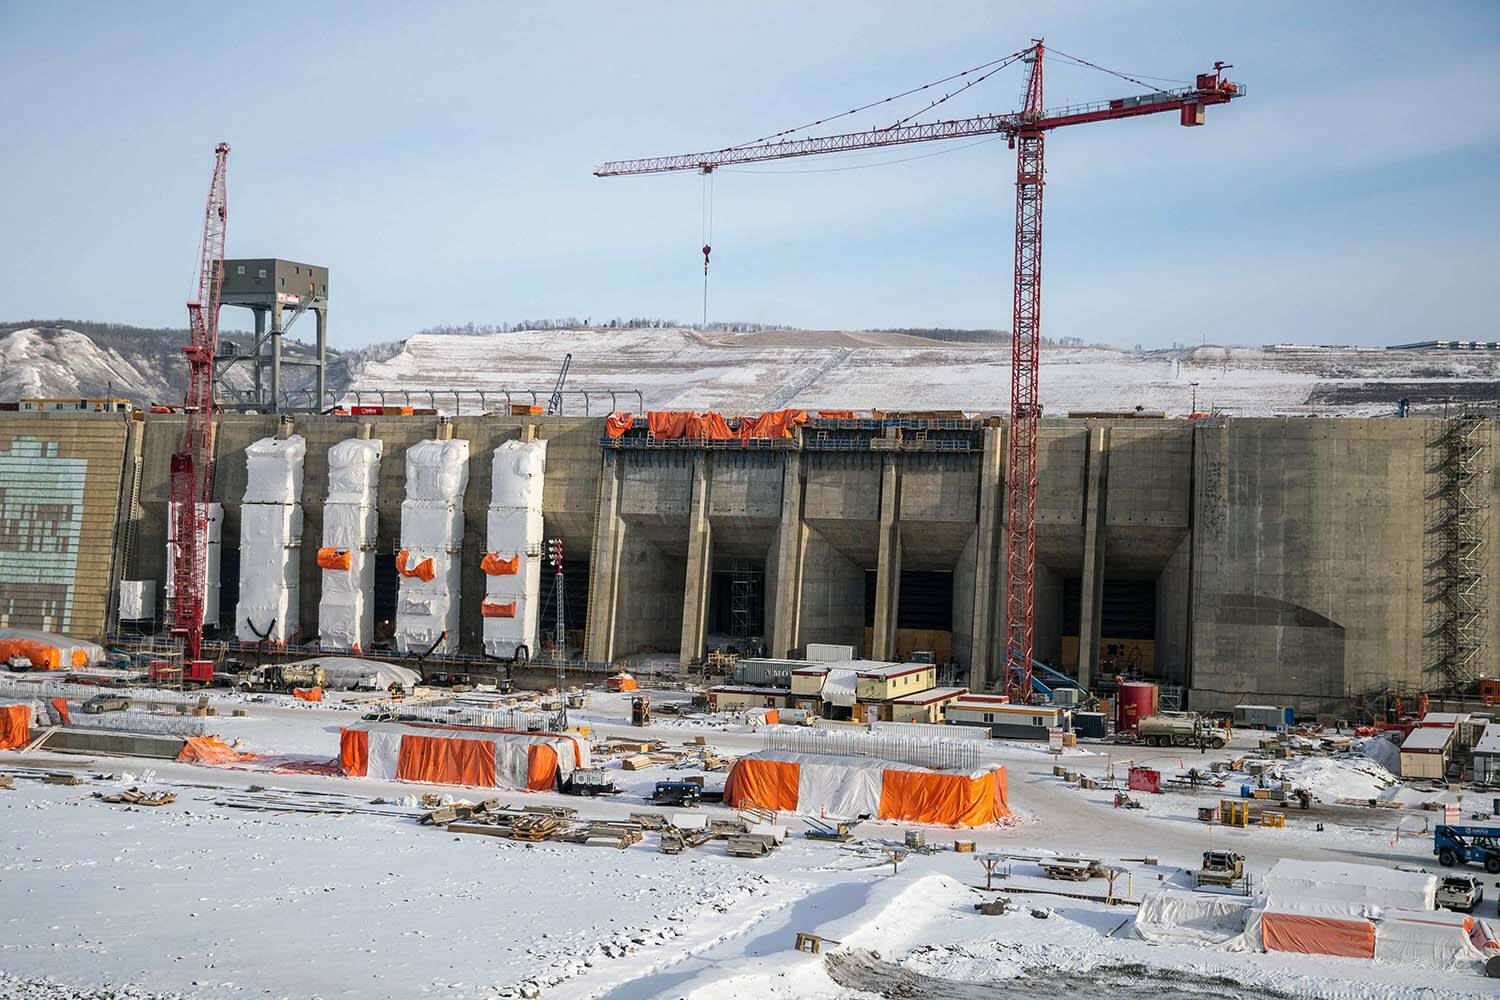 As construction of Site C continues, BC Hydro is asking to leave behind debris large enough to cover 28 soccer fields prior to flooding 80 kilometres of the Peace River. (Photo courtesy of BC Hydro)